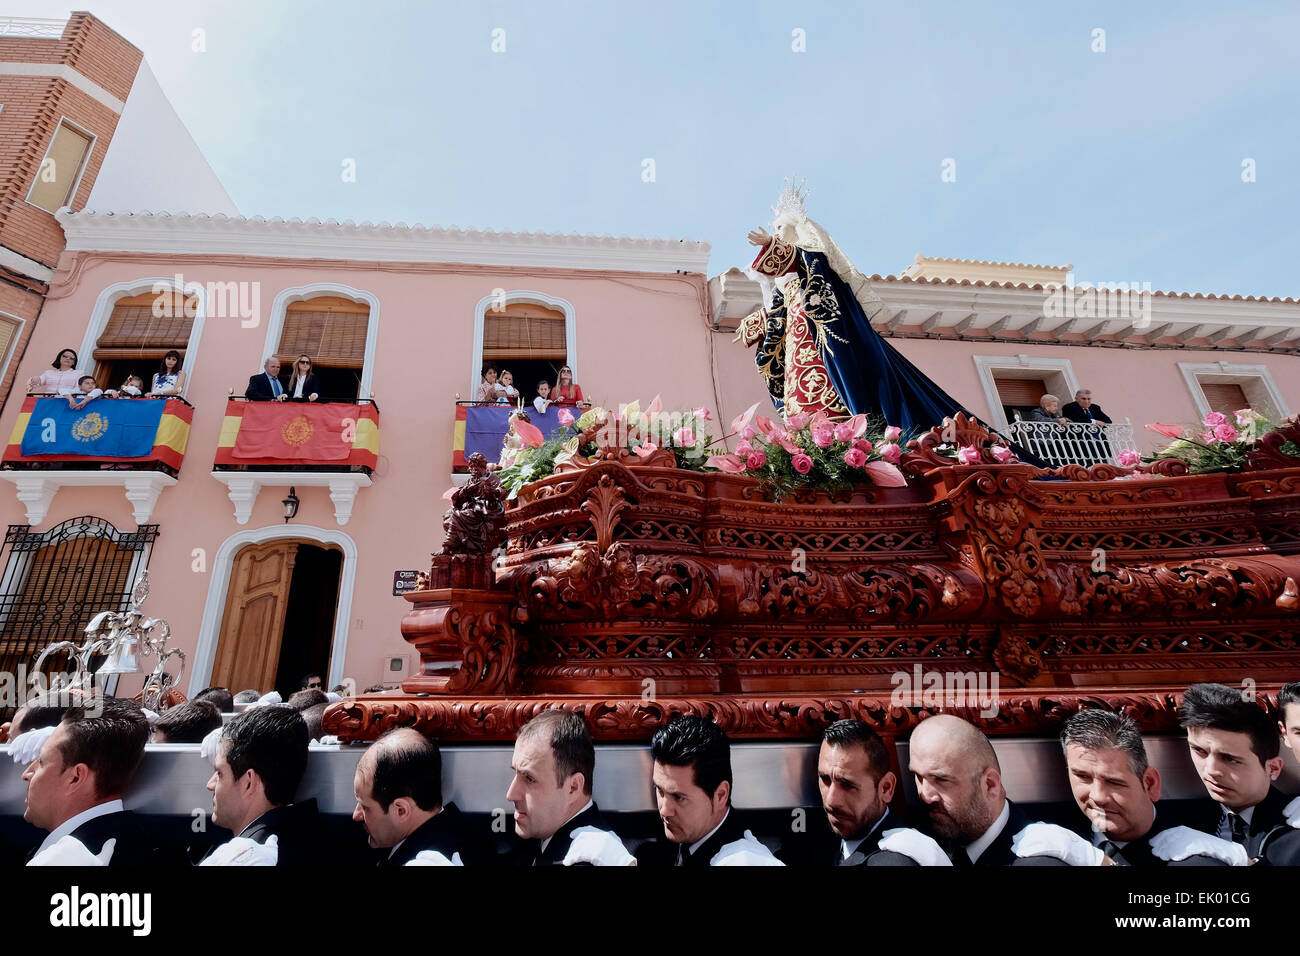 Albox, Almeria, Andalucia, Spain. 3 April, 2015: The Good Friday procession takes place in Albox, Andalucia. In line with other towns in Andalucia, Albox celebrates Easter with a number of religious processions. Penitents cover their heads and dress in traditional costumes to lead a procession of religious floats, called 'pasos' through the streets to the town centre. Credit:  Tom Corban/Alamy Live News Stock Photo